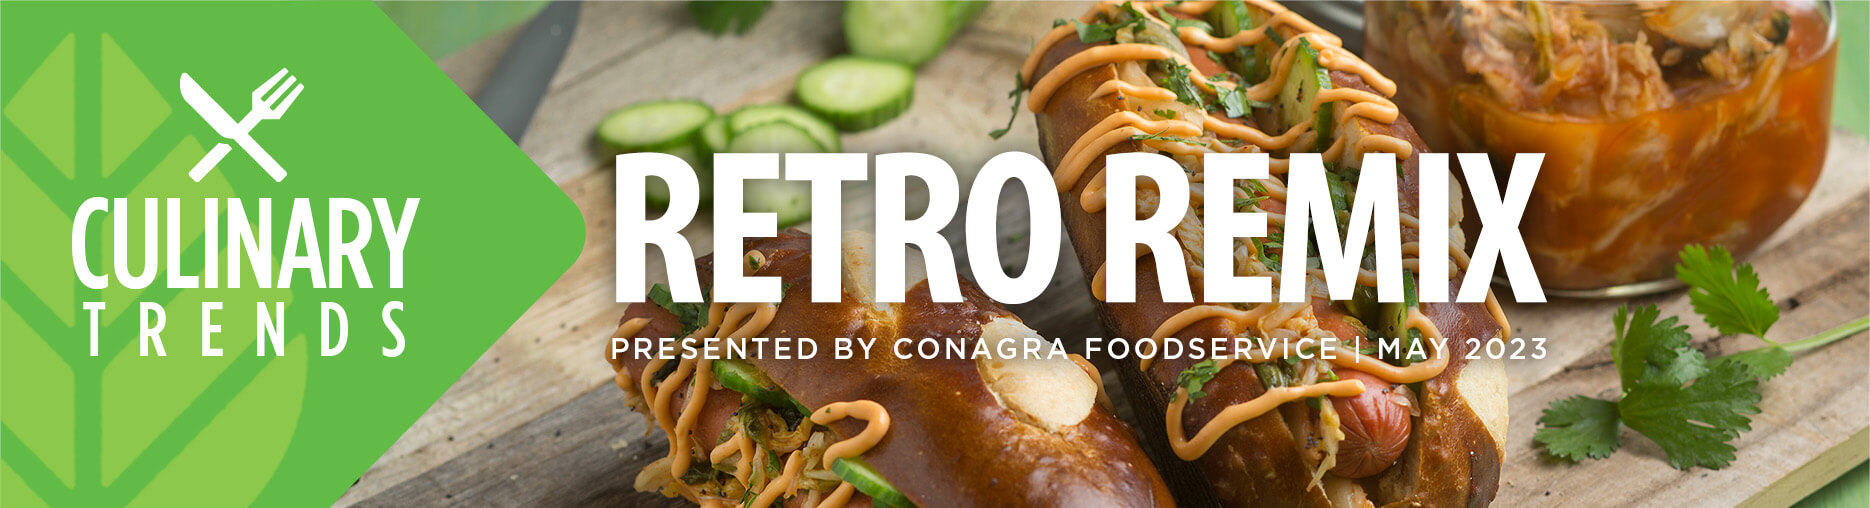 Culinary Trends May 2023, presented by Conagra Foodservice: Retro Remix